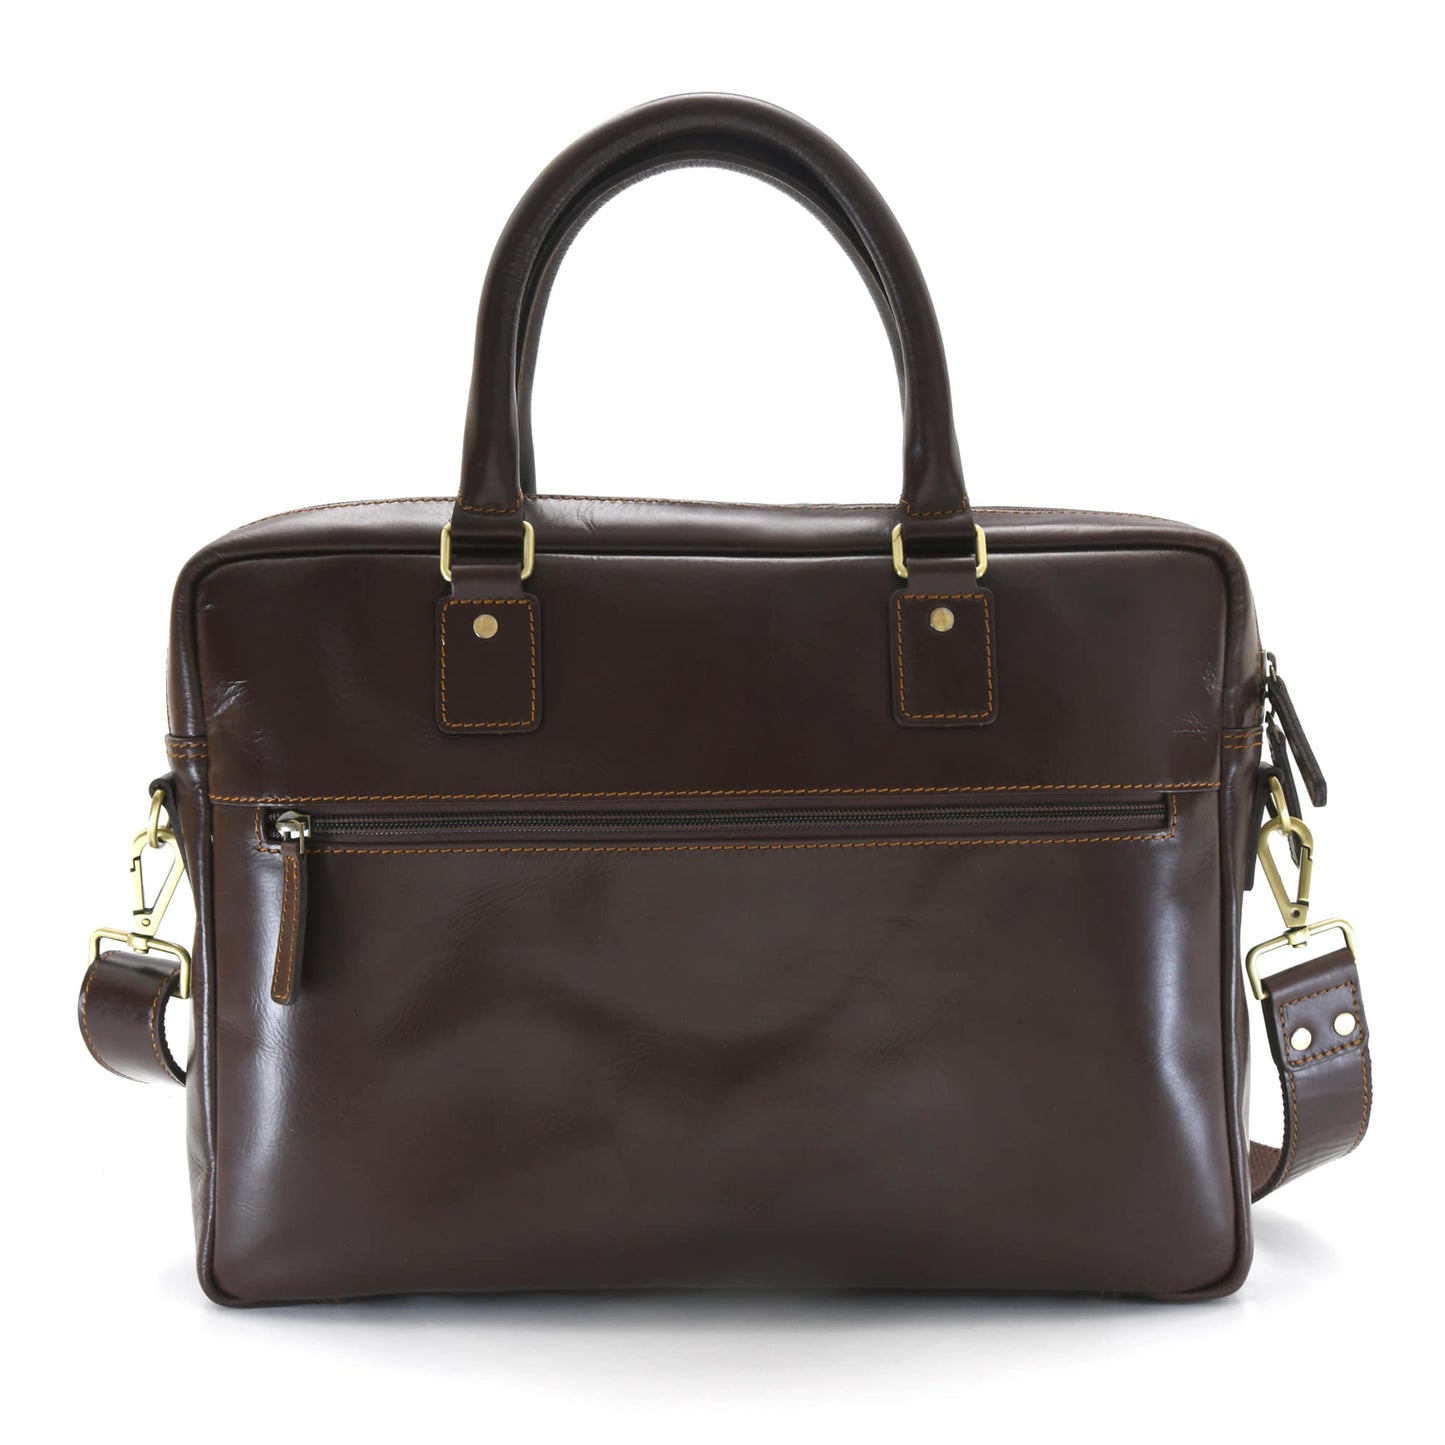 Style n Craft 392009 Men's Portfolio Briefcase Bag in Full Grain Dark Brown Leather - Back View showing the External Zippered Pocket